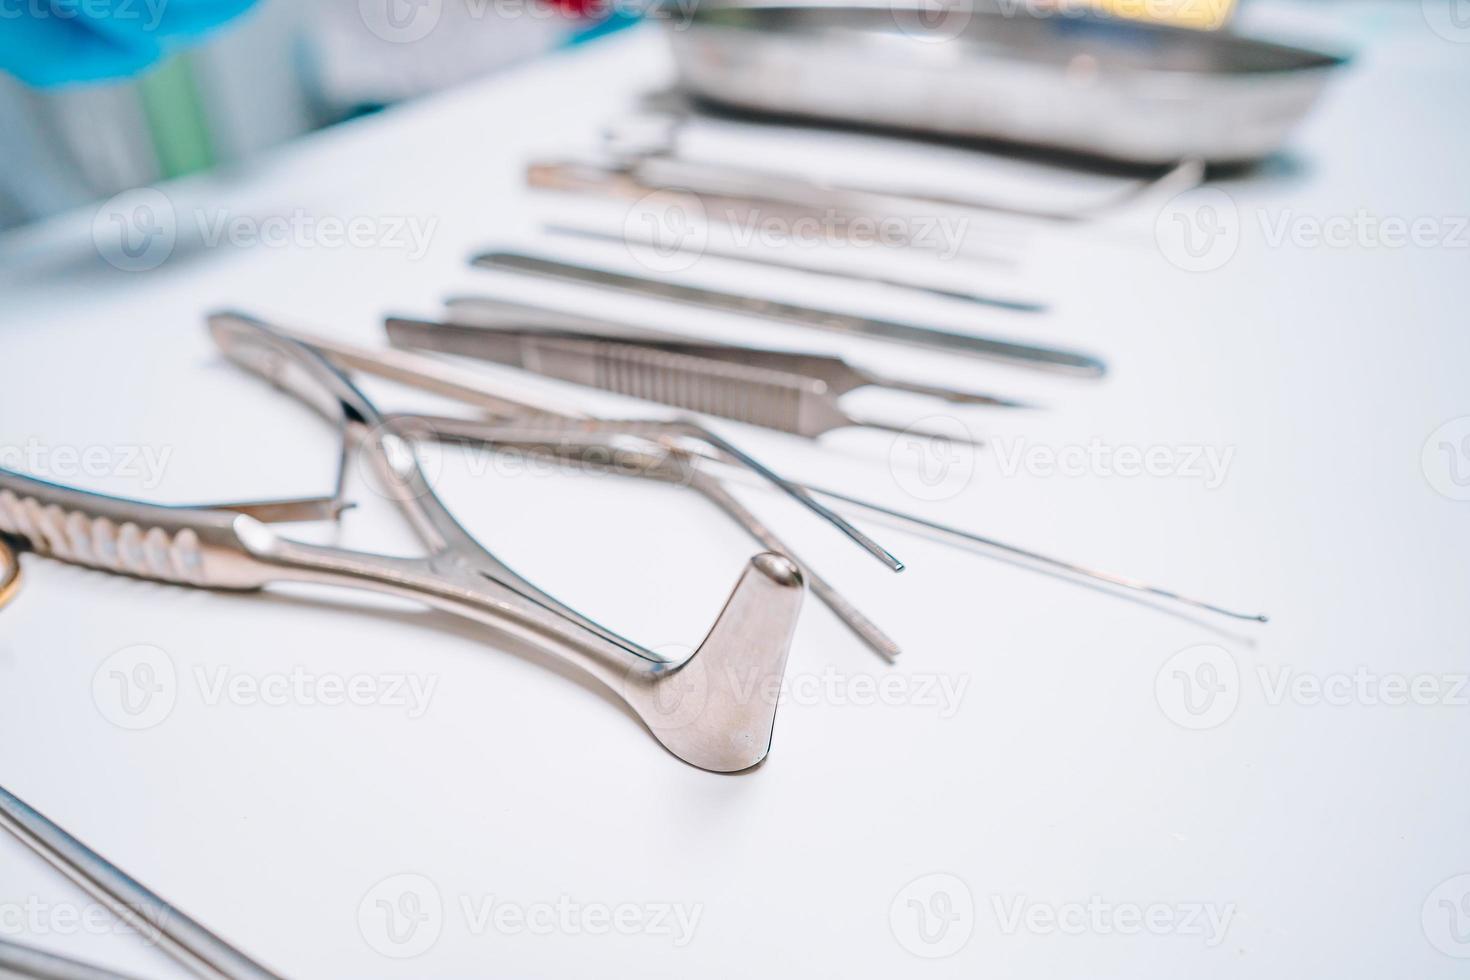 Several surgical instruments lie on a white table photo